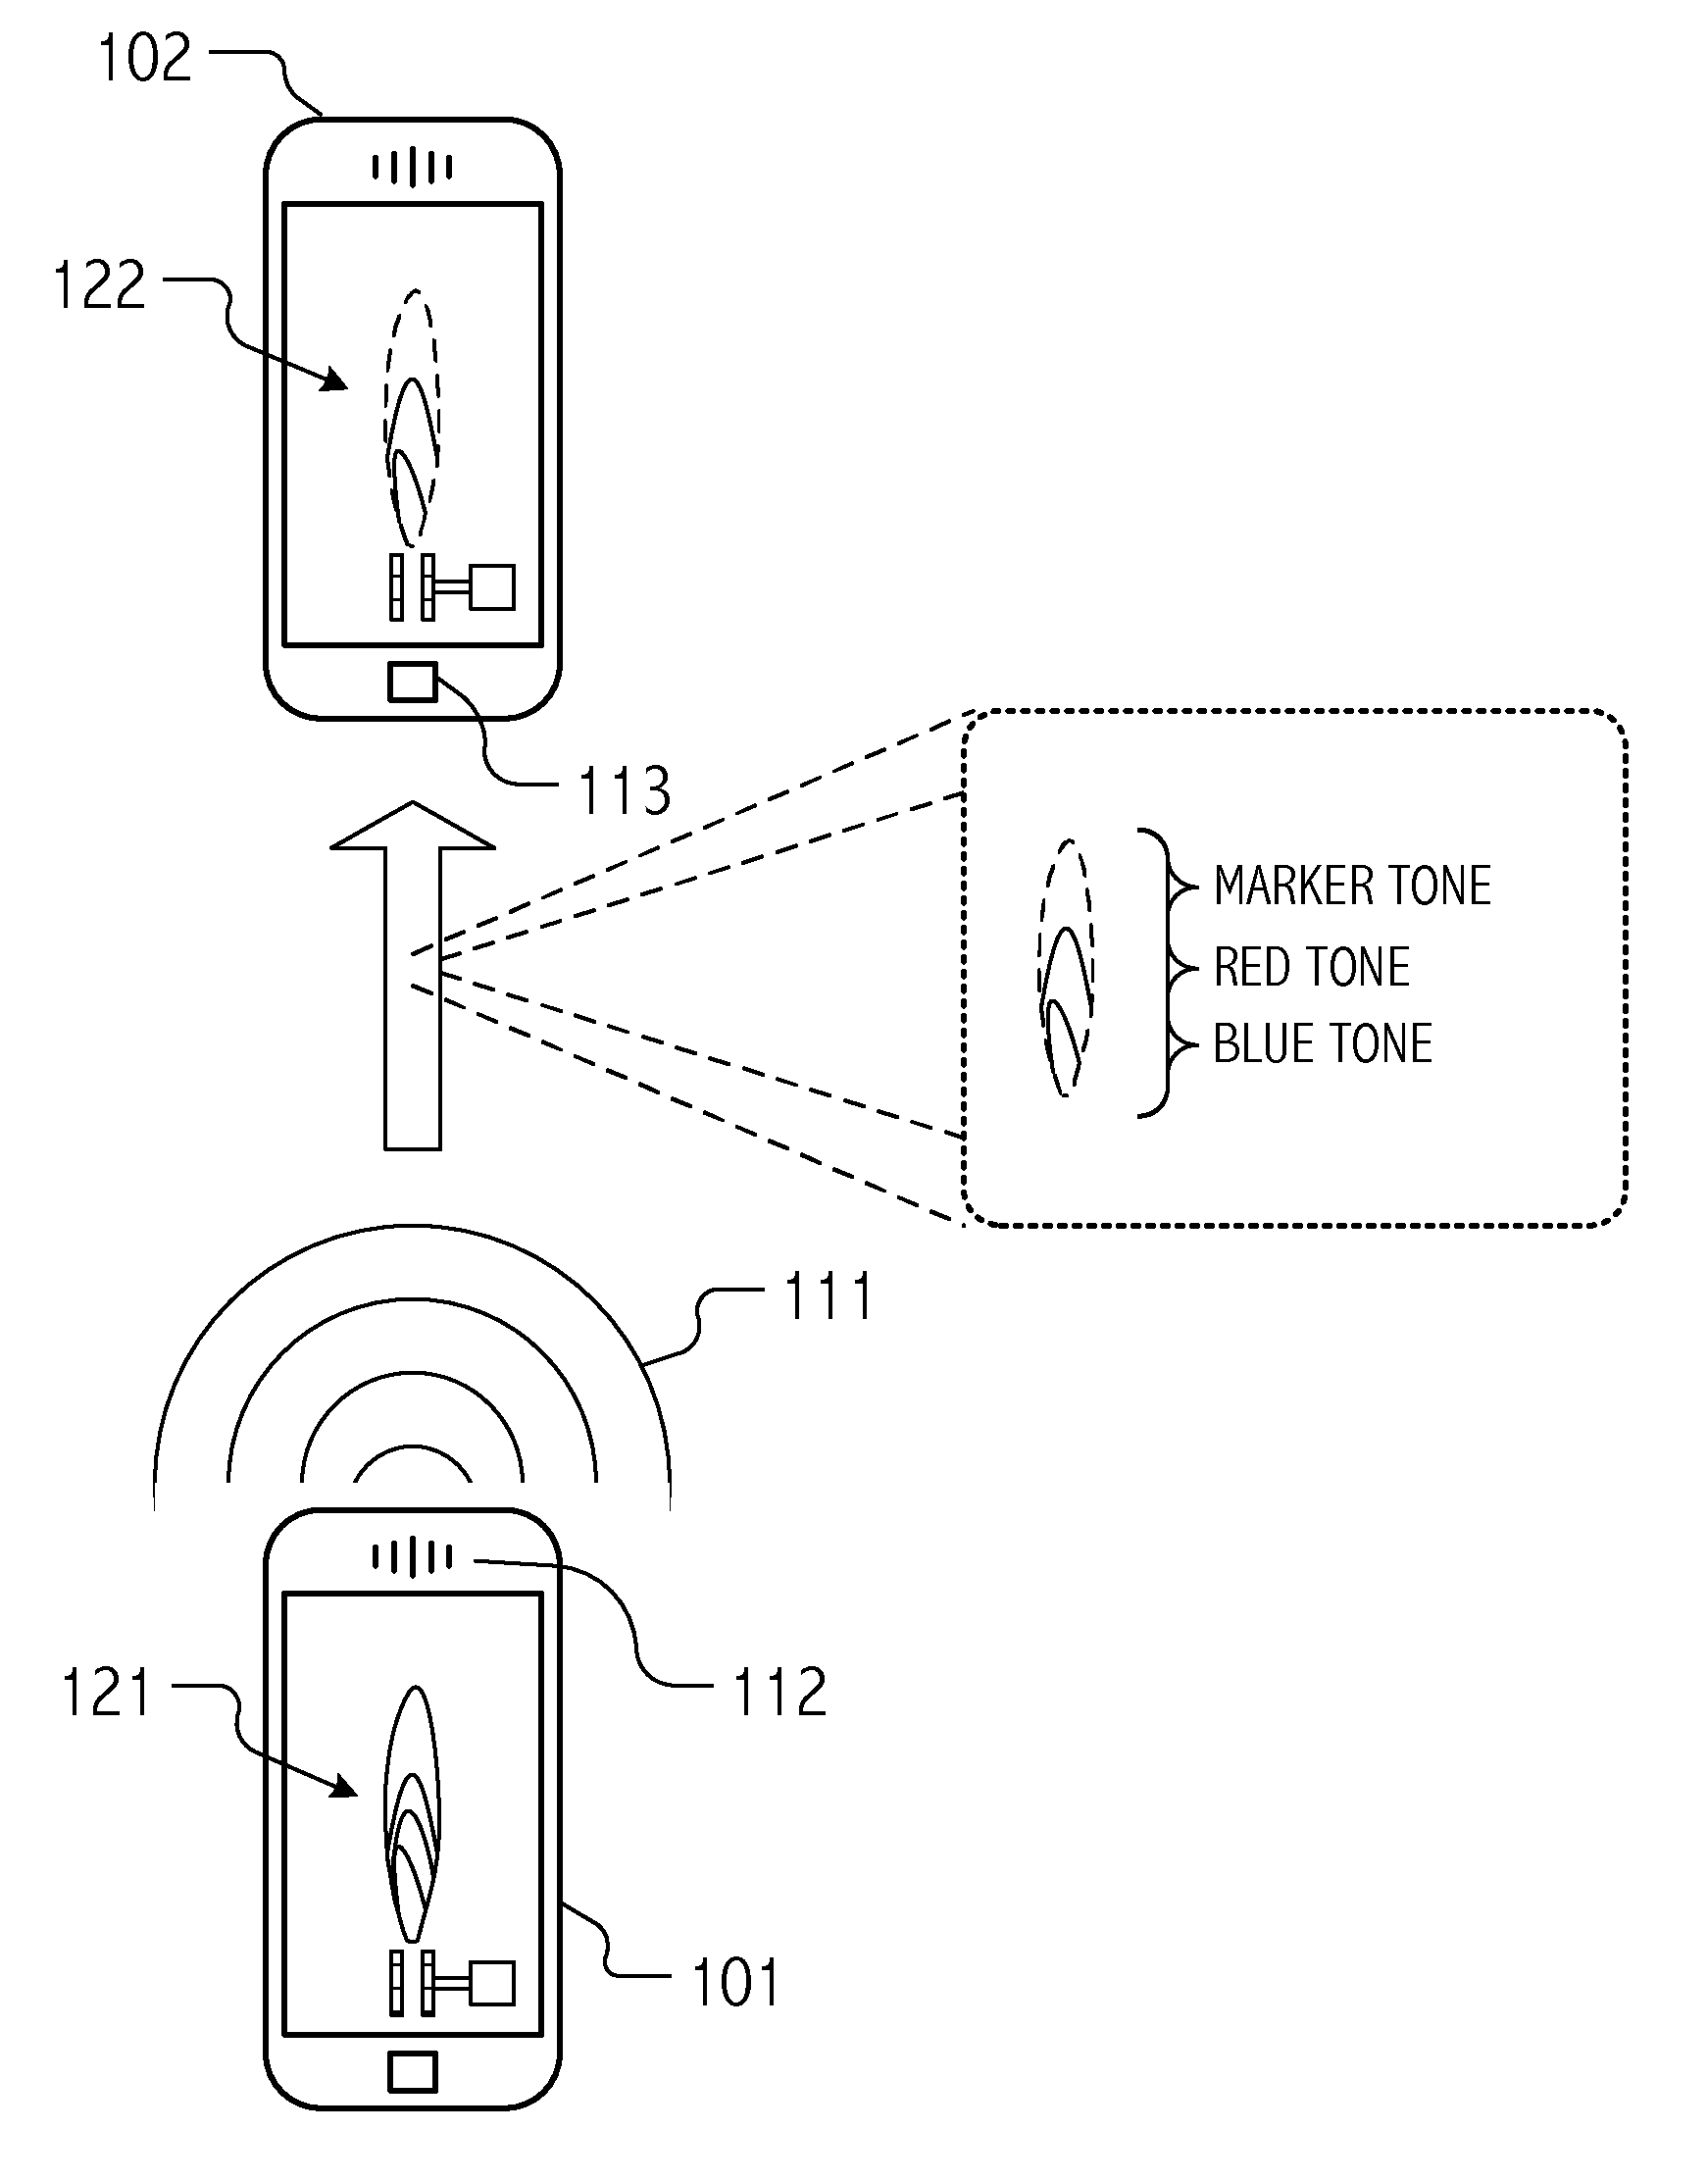 System and method for communication between mobile devices using digital/acoustic techniques